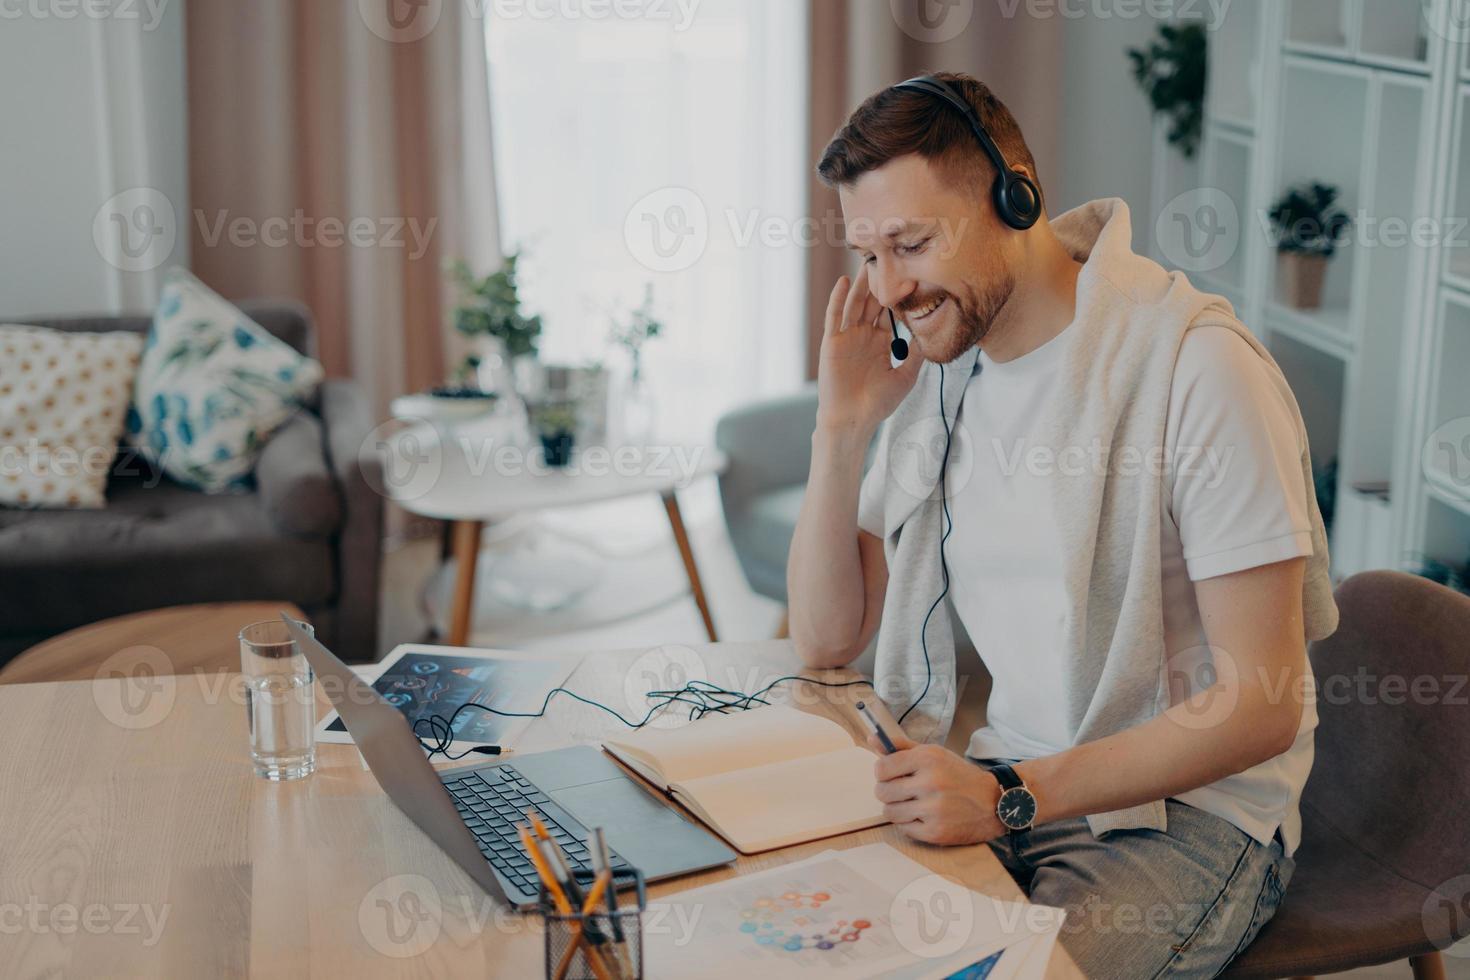 Smiling man using headset and notebook while learning online photo